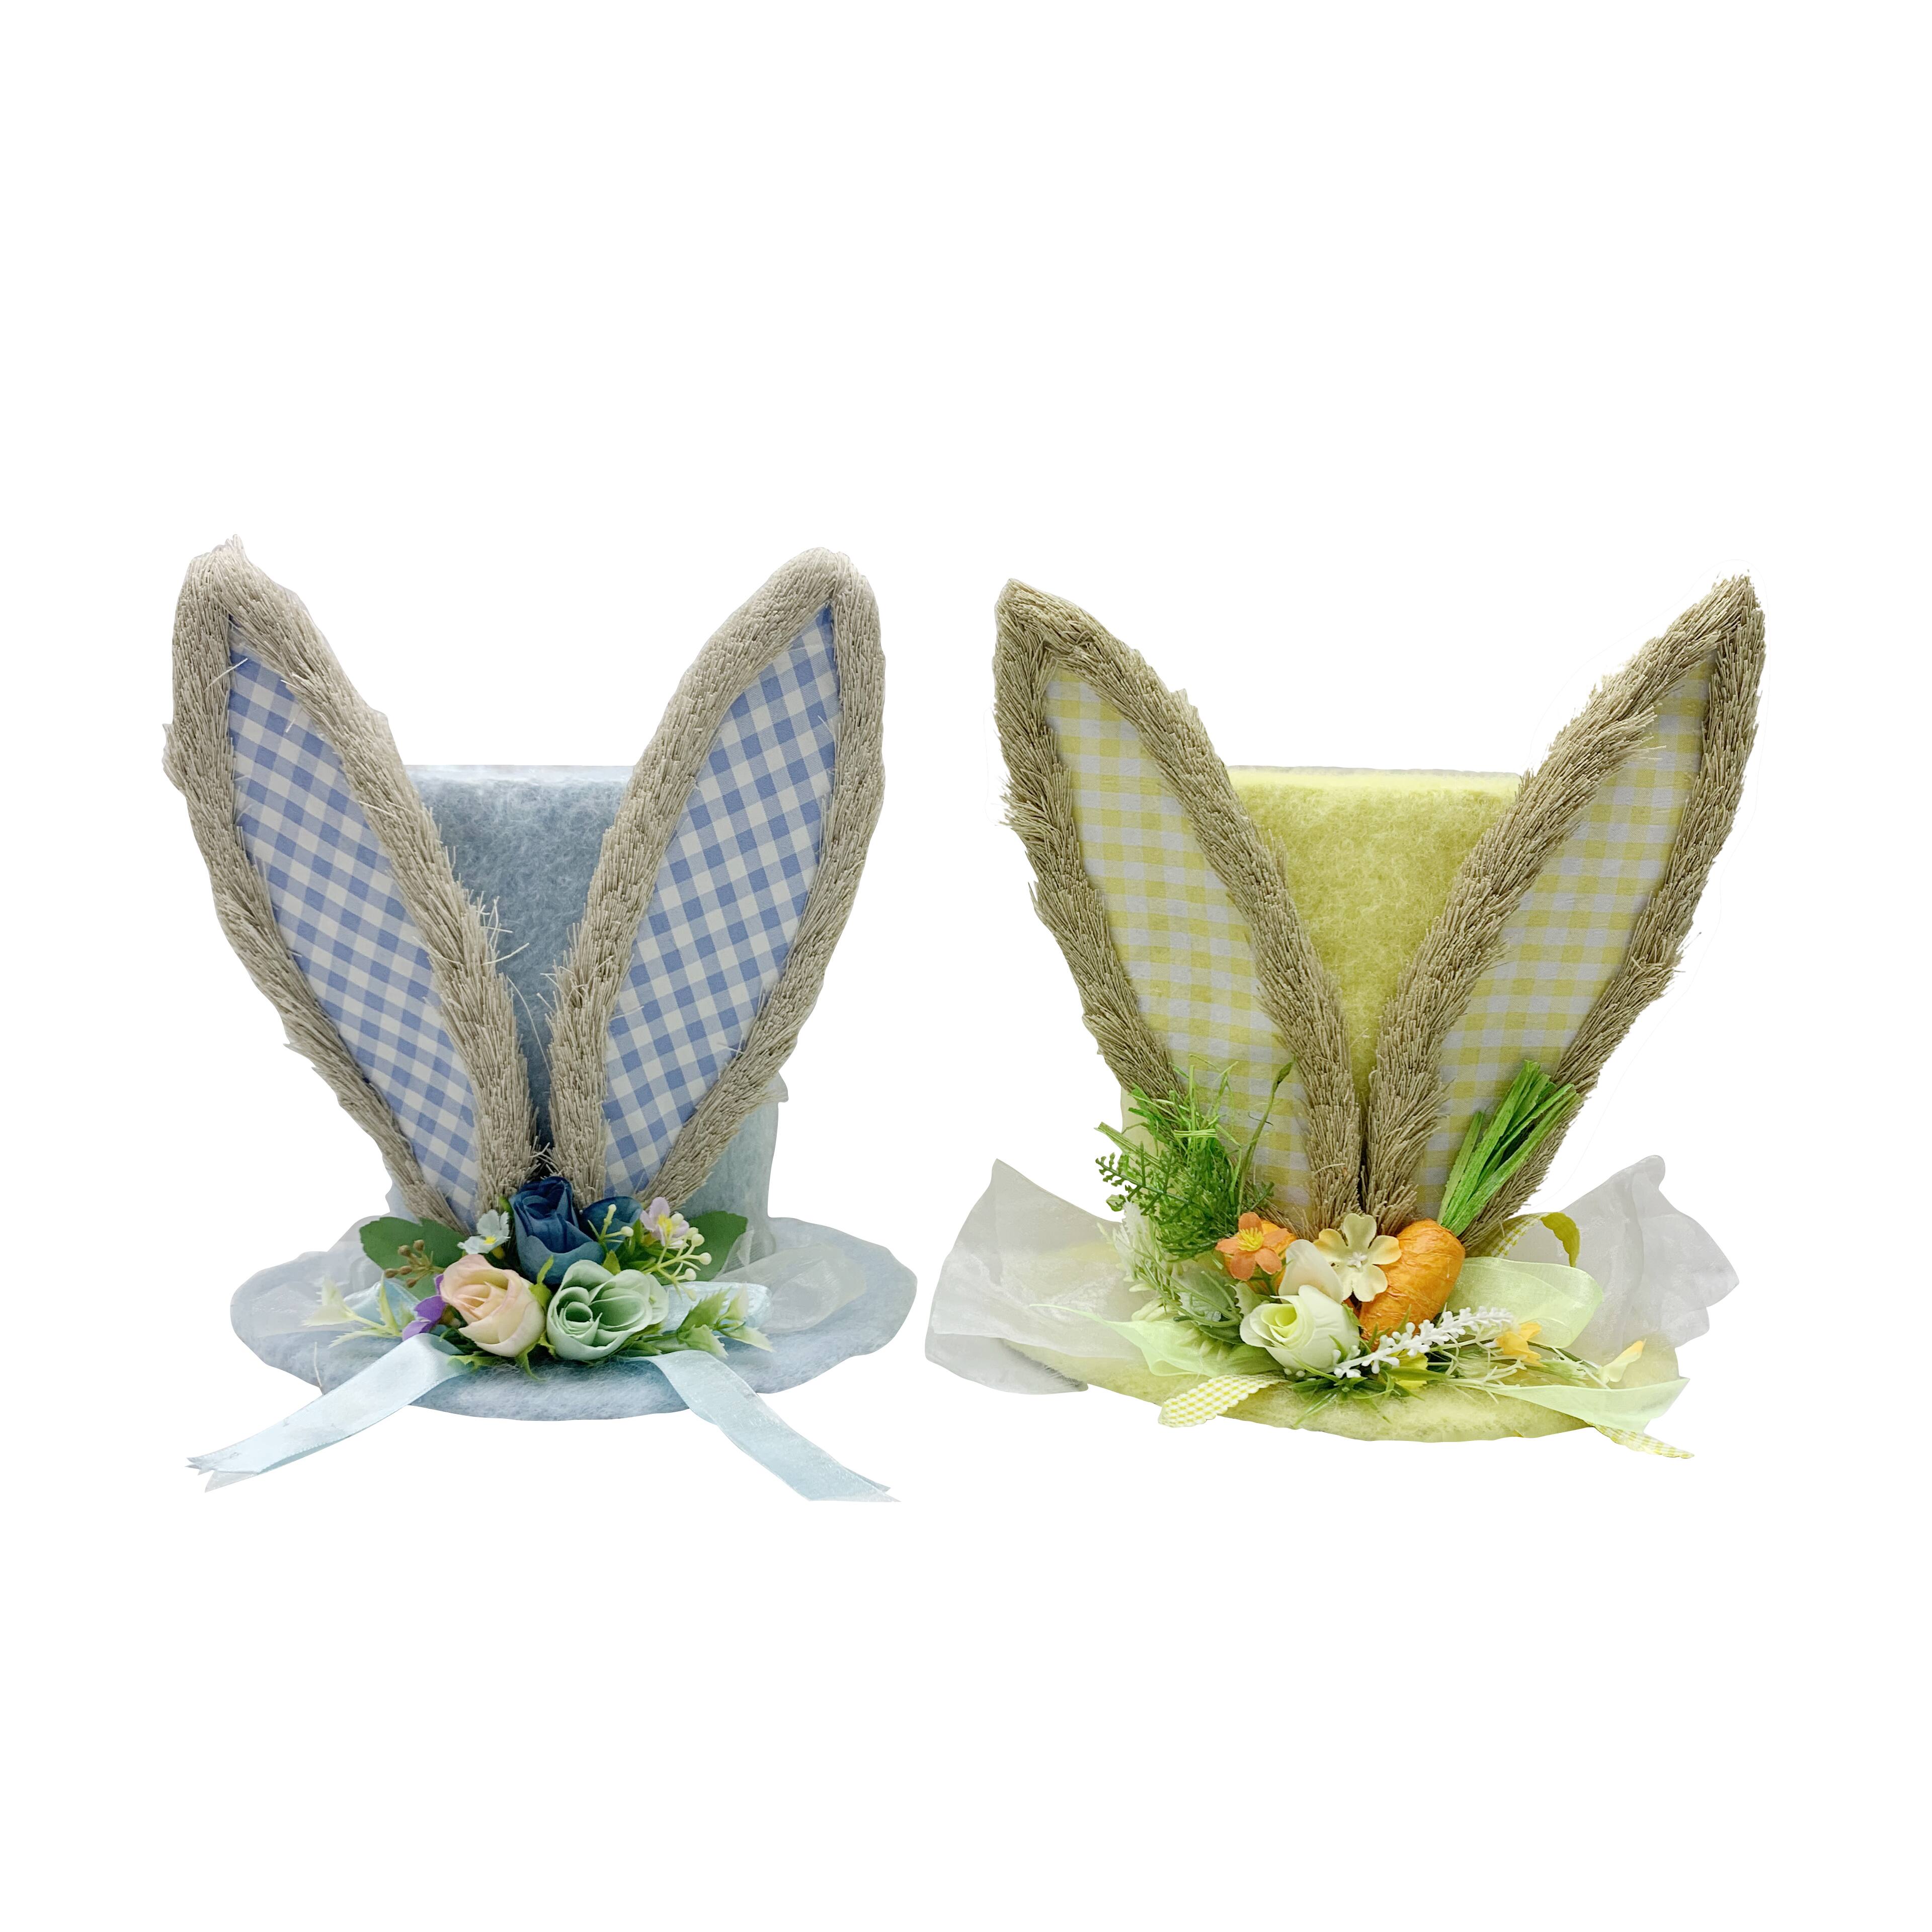 Assorted 11 Plaid Tabletop Bunny Hat by Ashland®, 1pc.